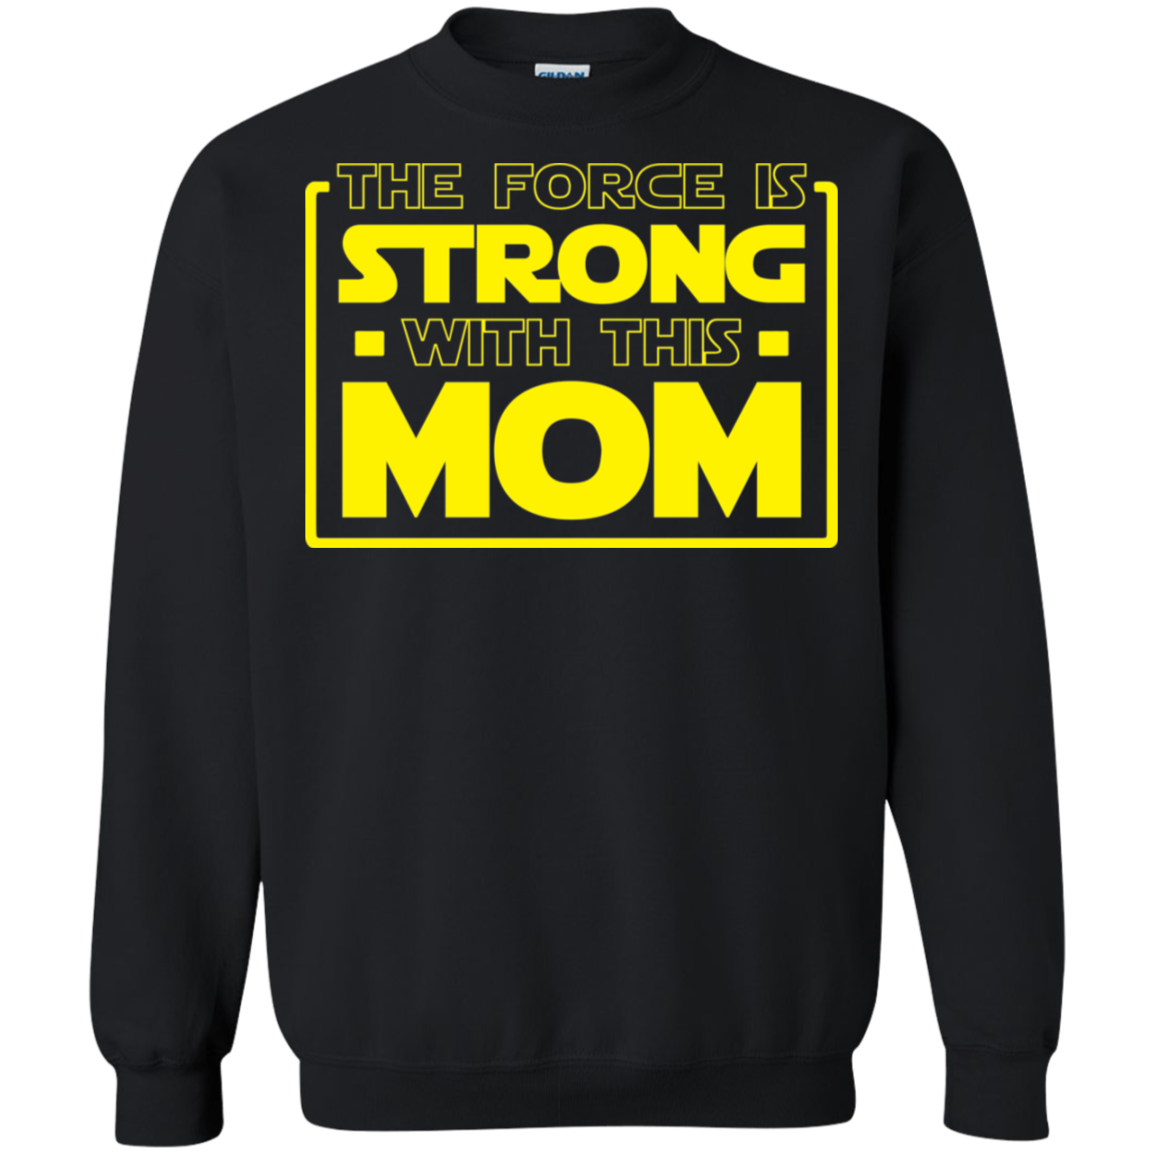 The Force Is Strong With This Mom - Mothers Crewneck Pullover Sweatshirt  8 oz.